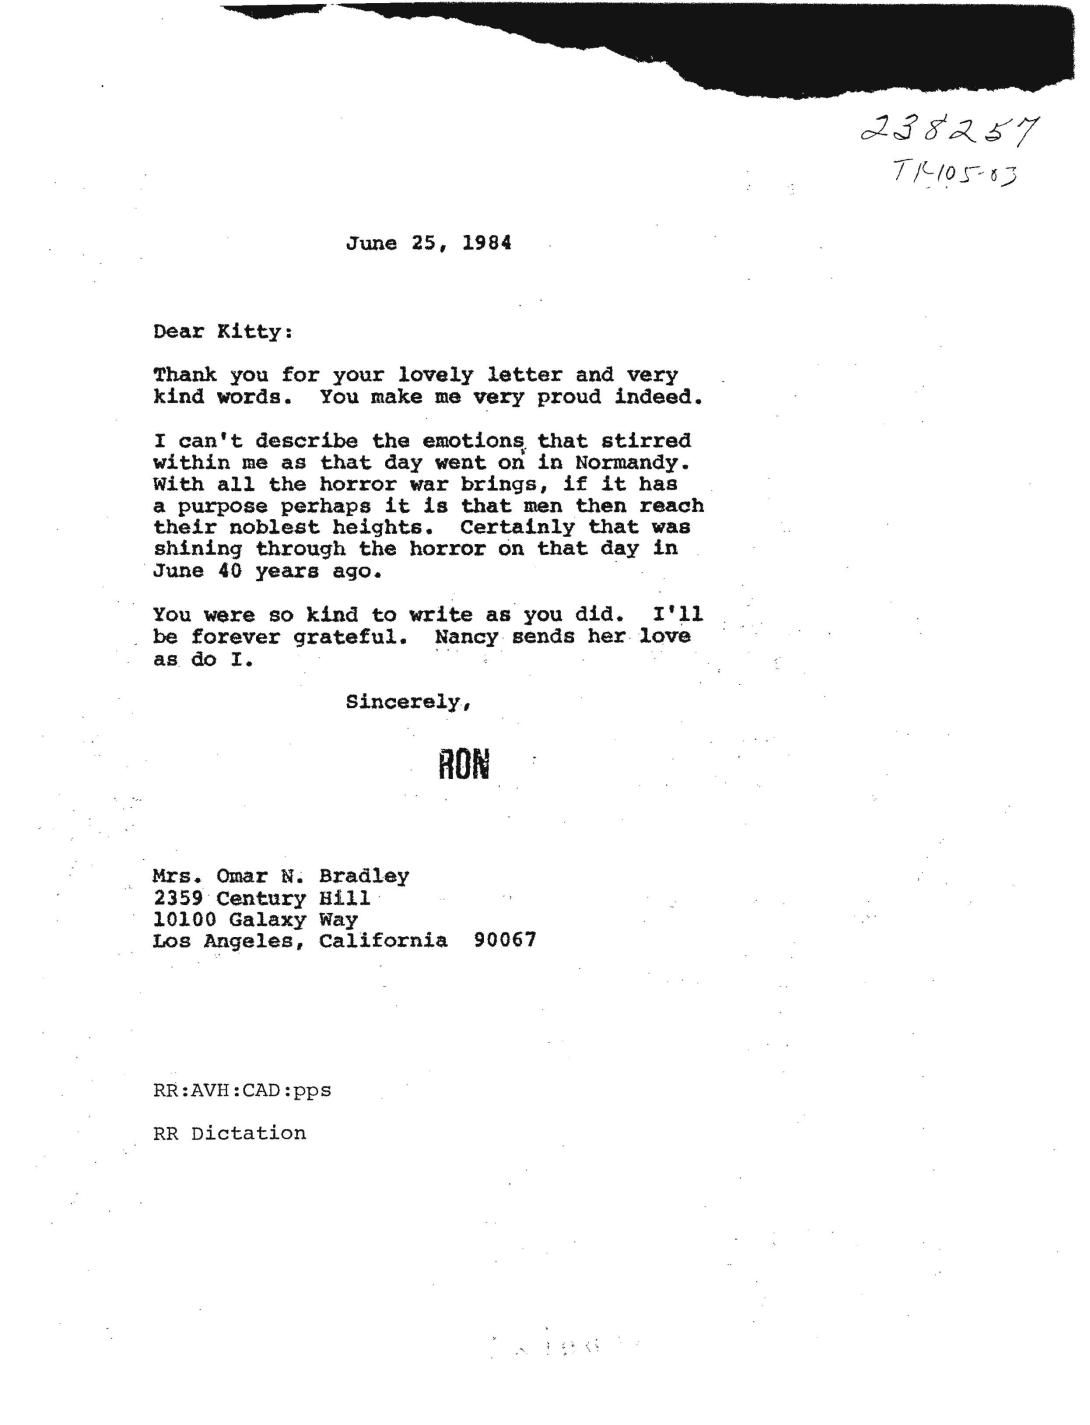 Letter: Reagan to Mrs. Omar N. Bradley re: Thanking "Kitty" for letter and kind words.